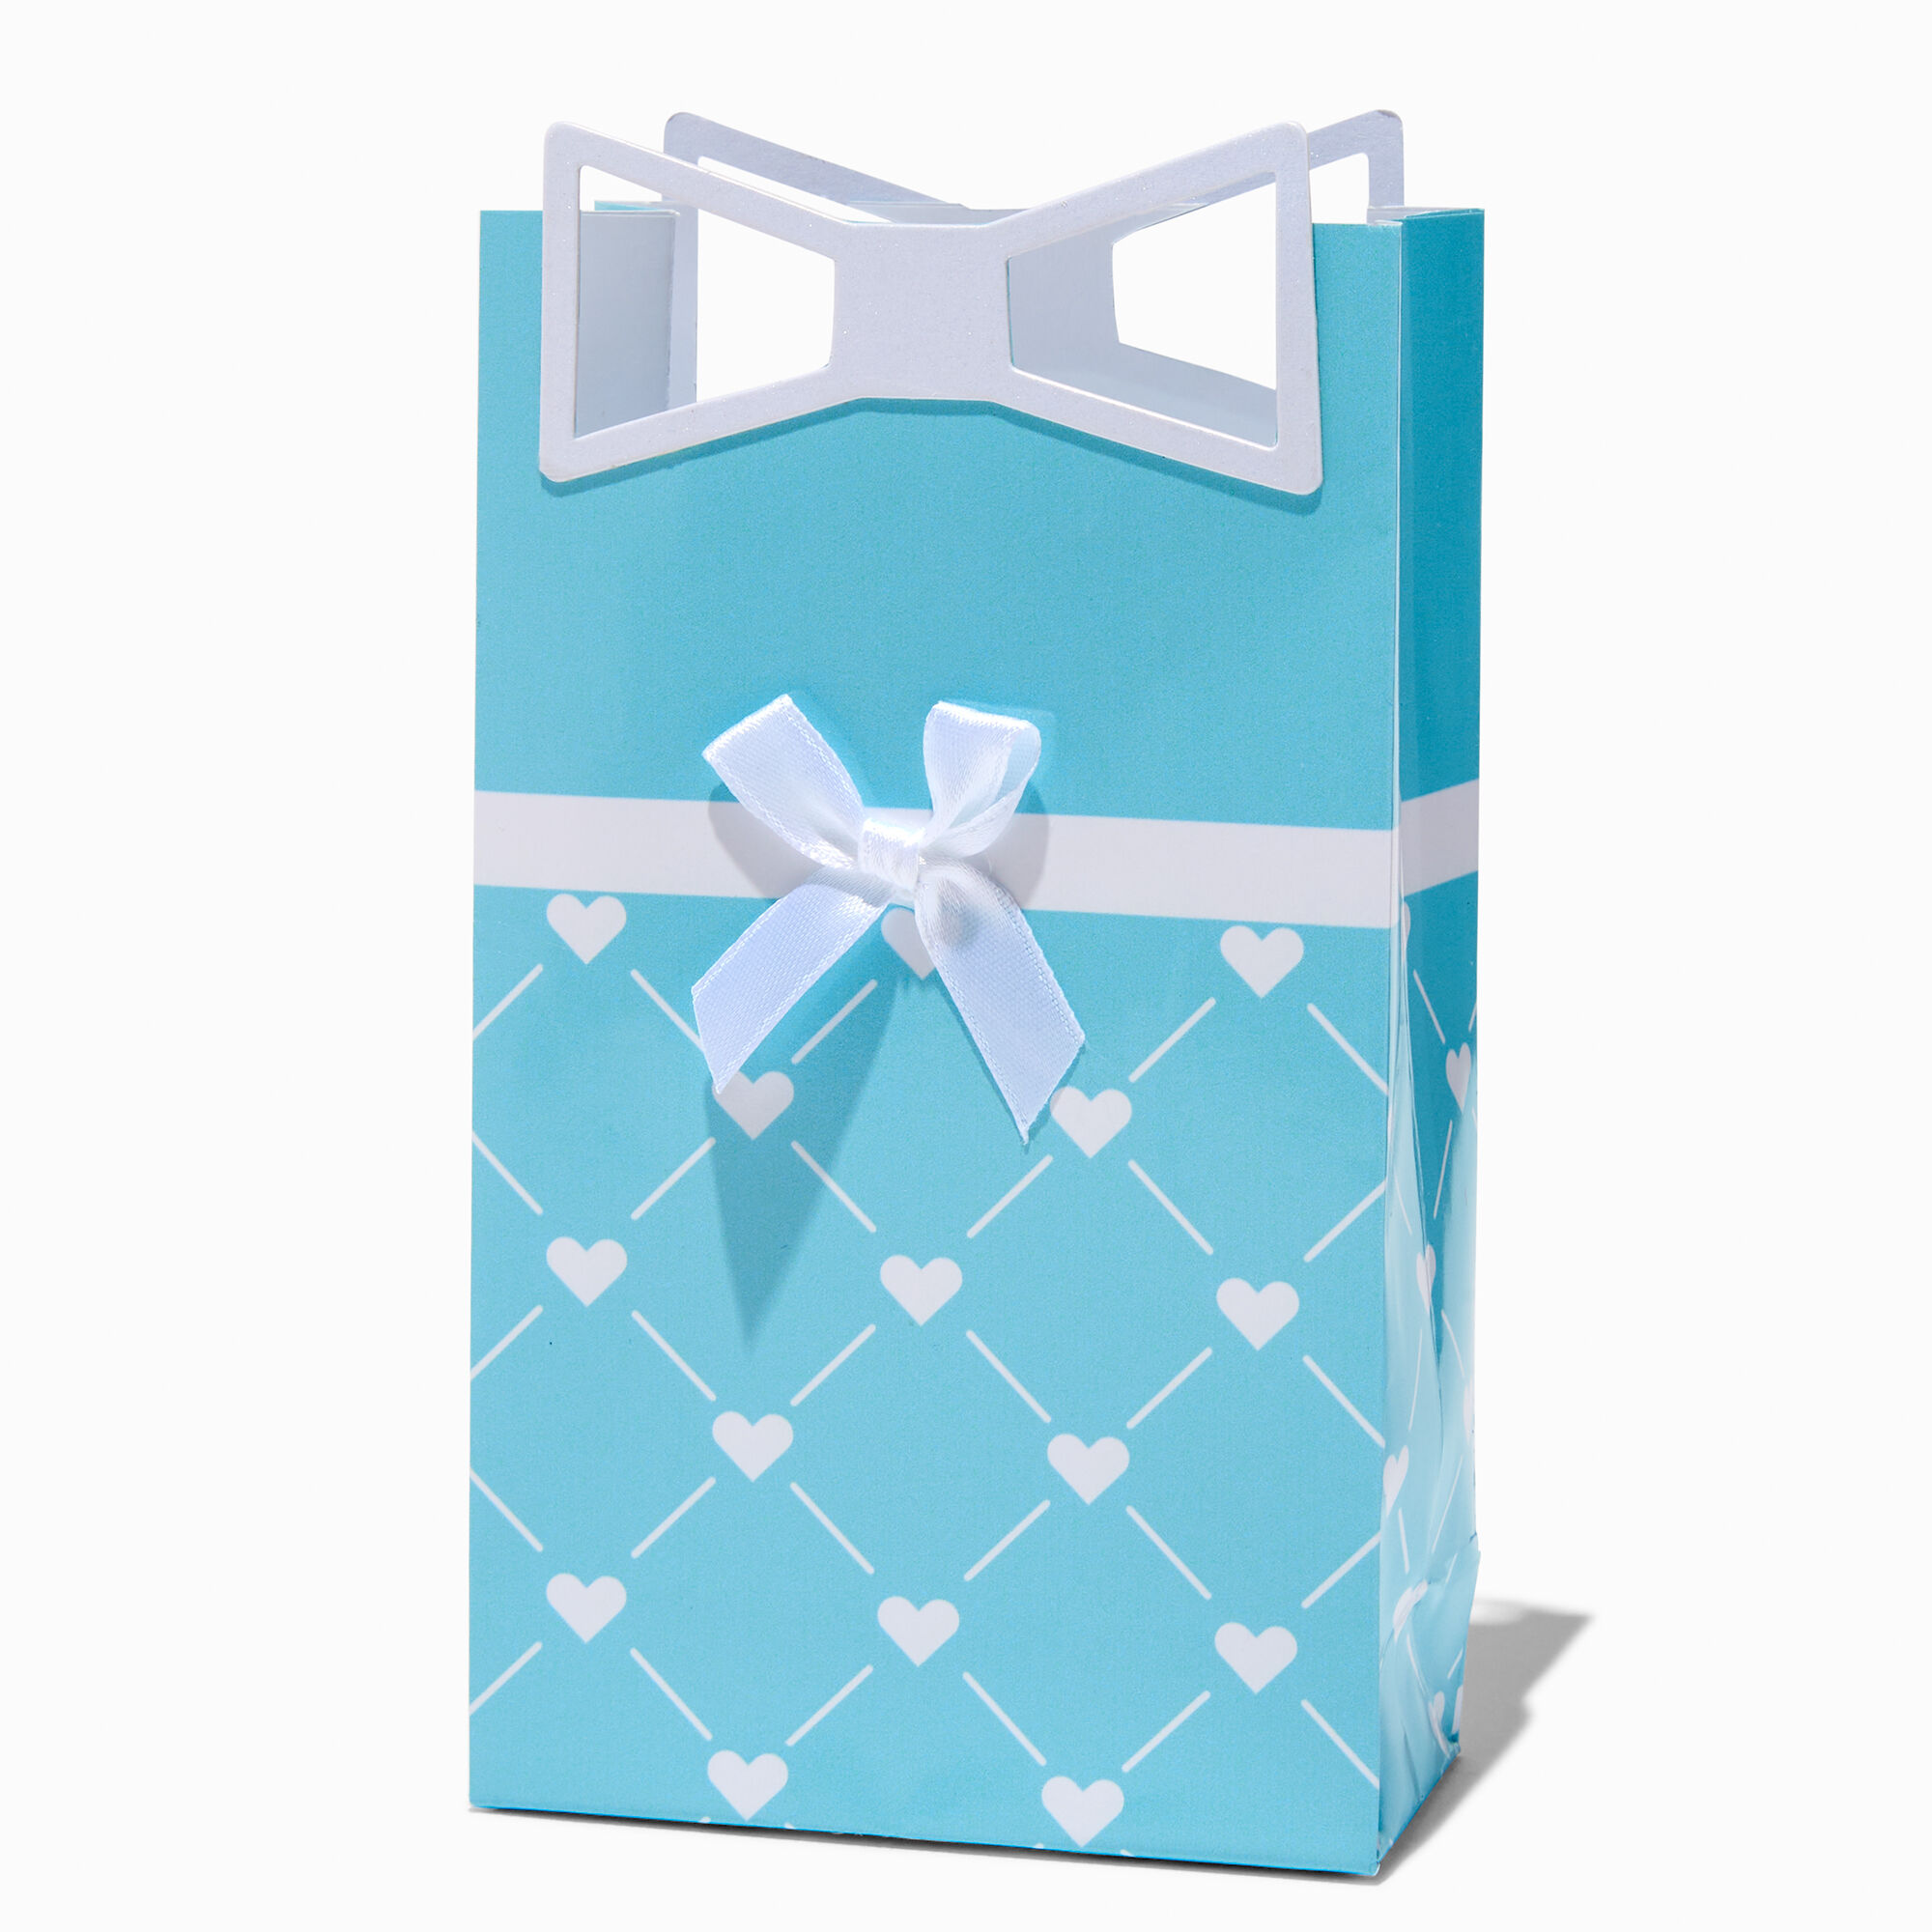 View Claires Hearts Bows Gift Bag Small Turquoise information